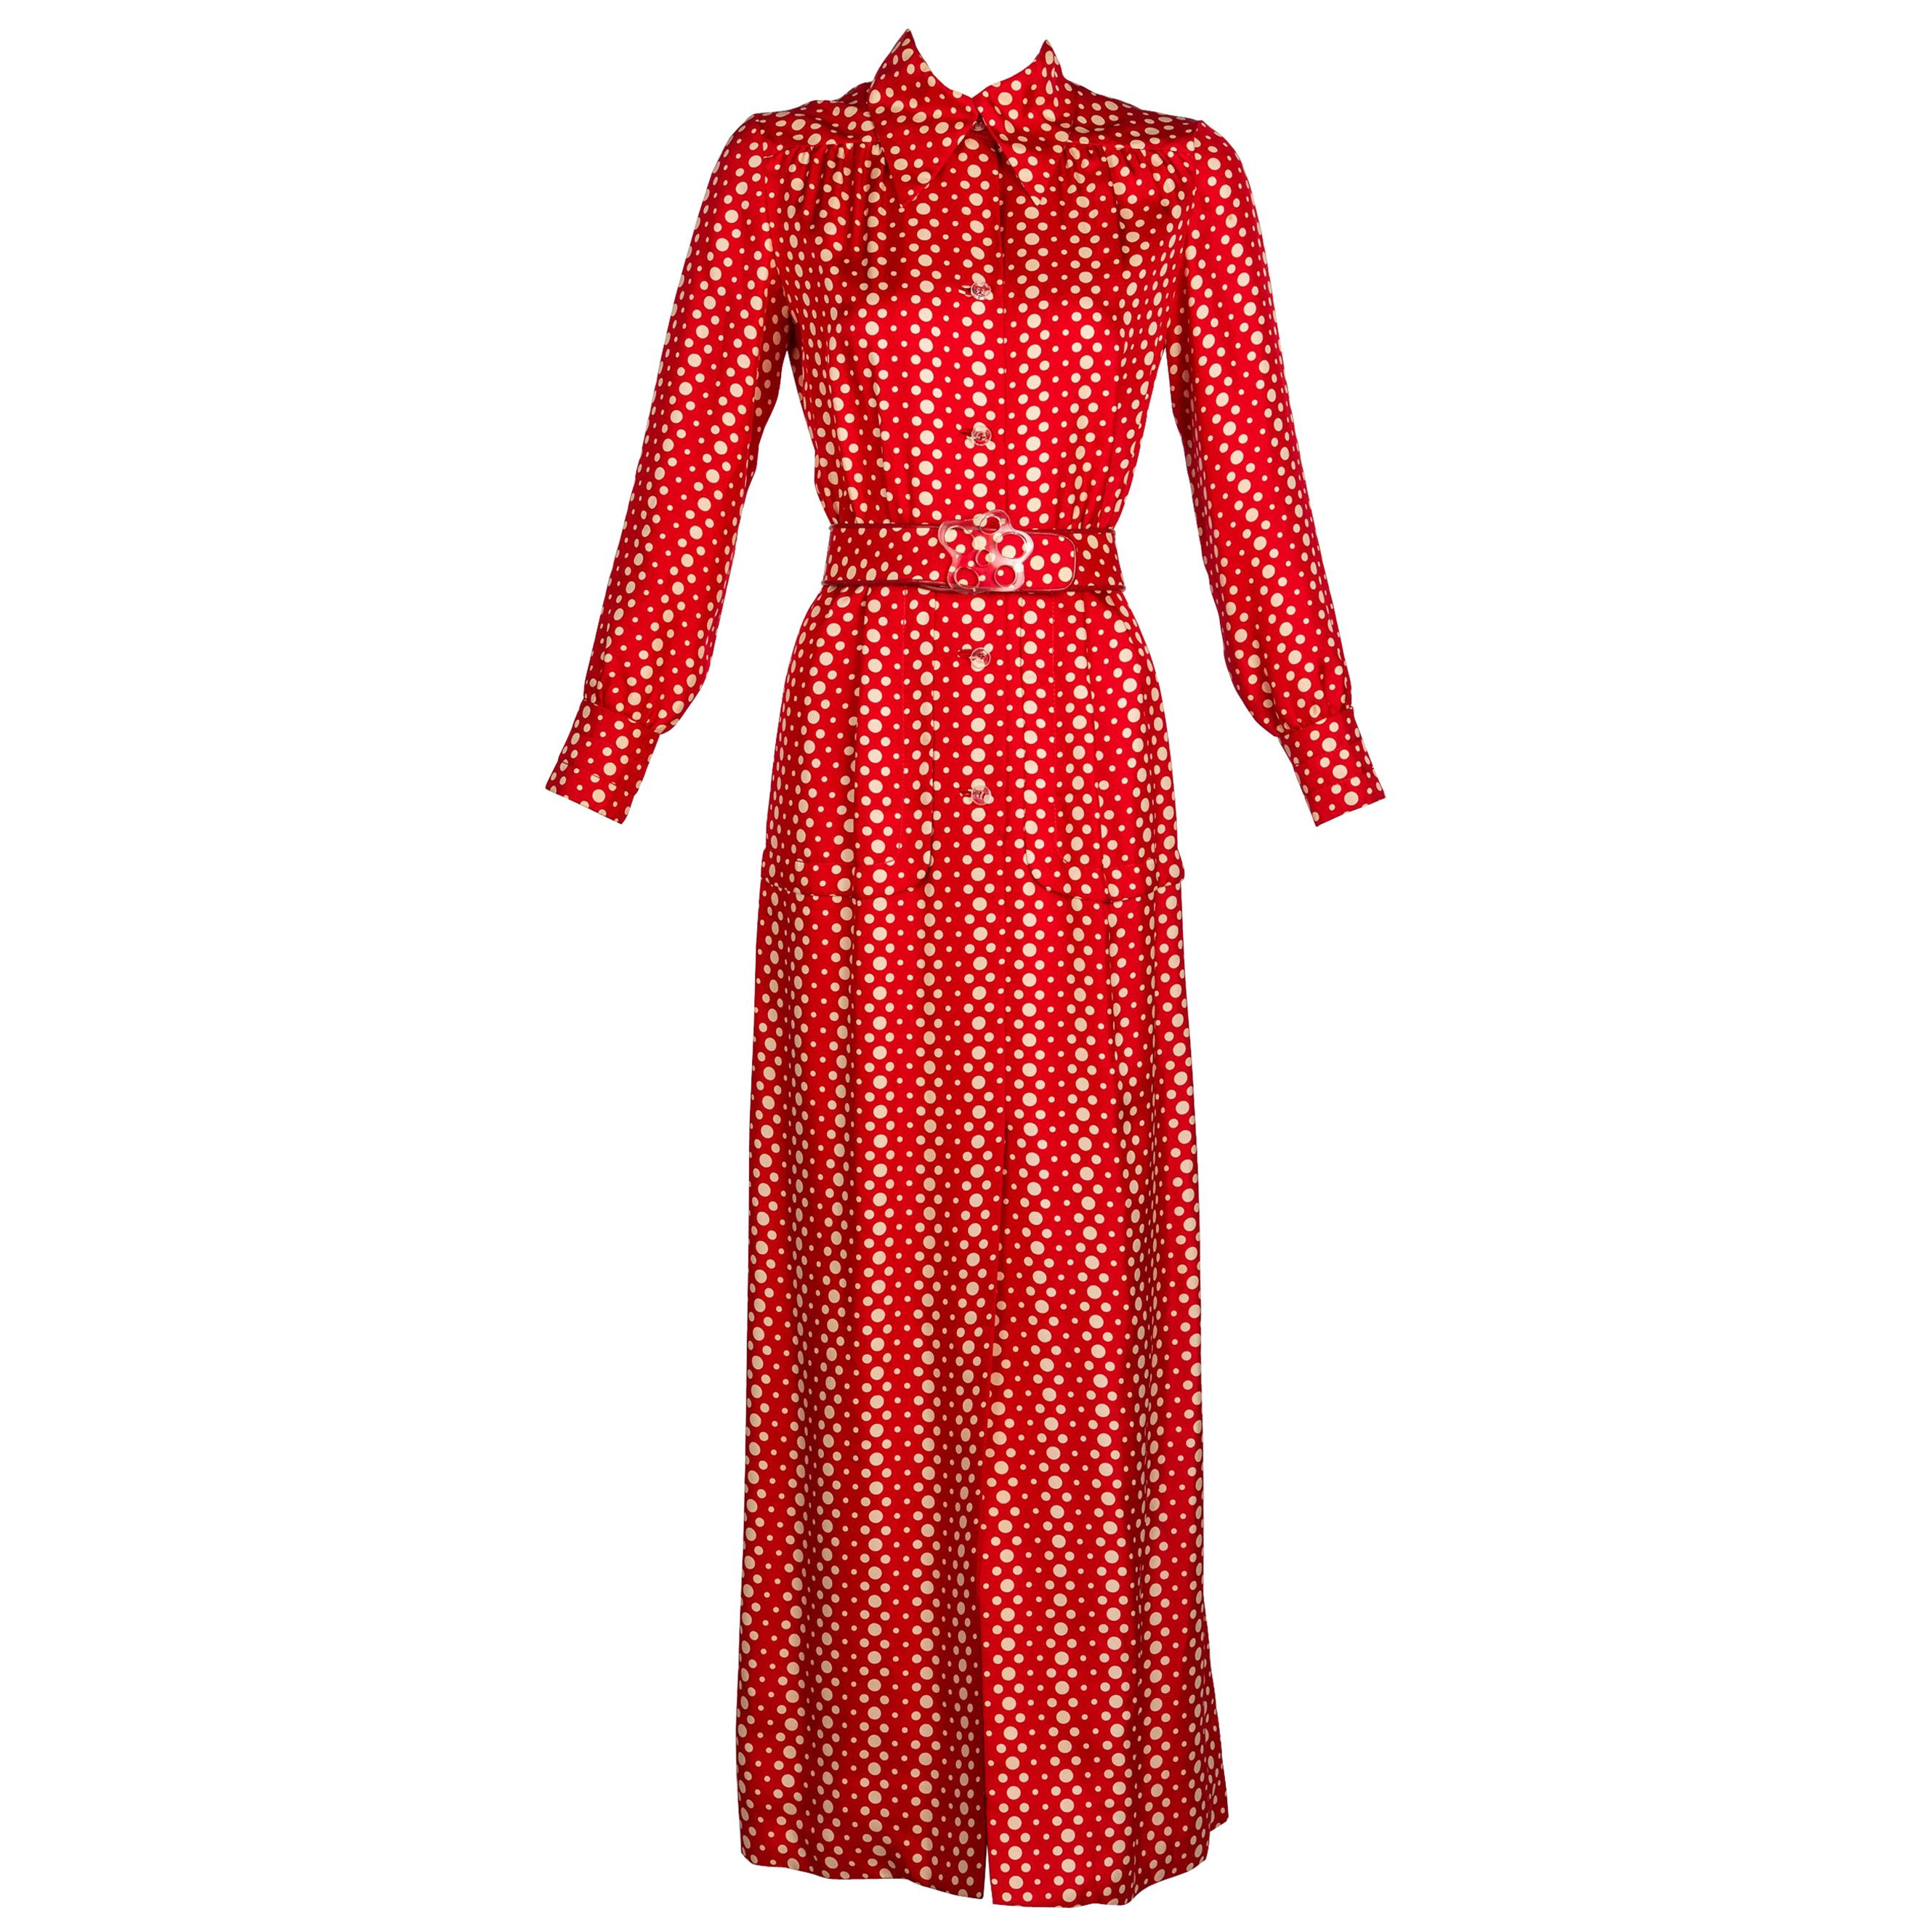 Galanos Red Polka Dot Lucite Belted Silk Maxi Dress, 1970s For Sale